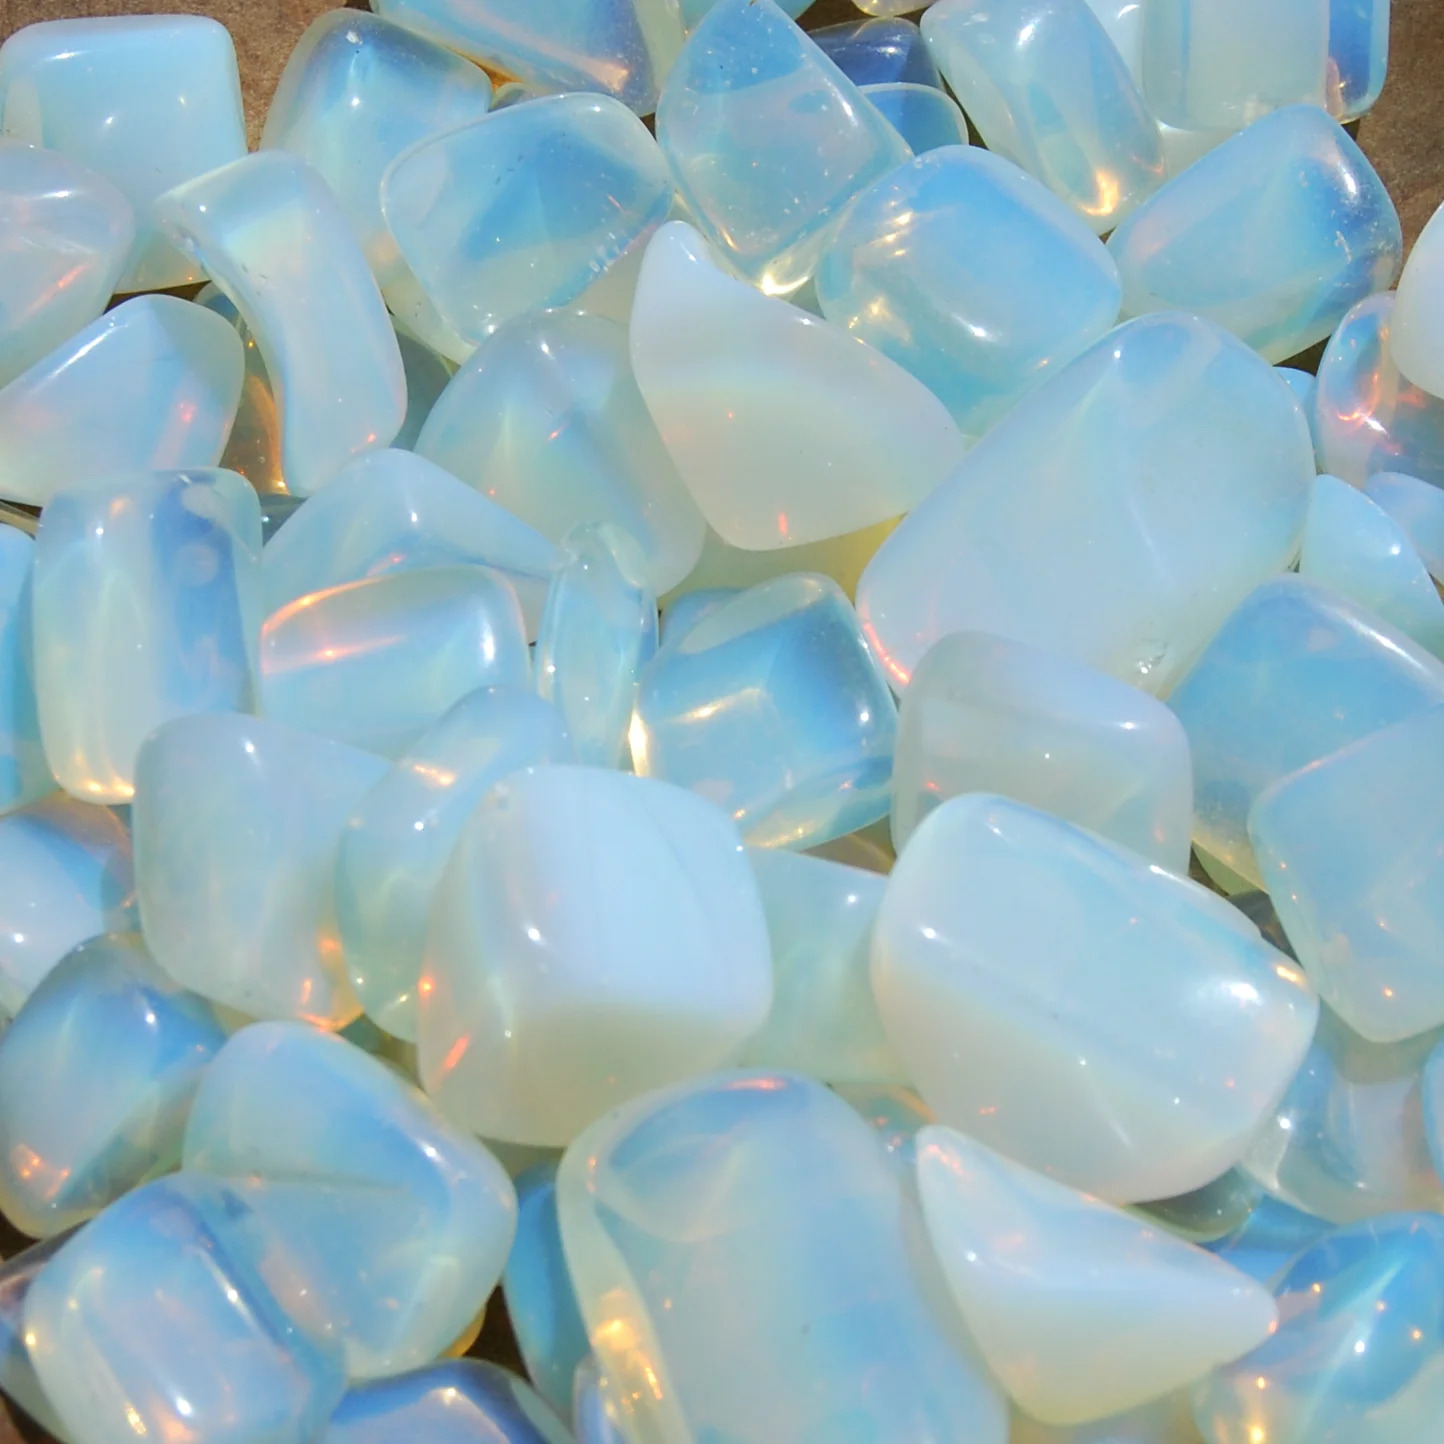 Opalite Crystal Tumbled Stones